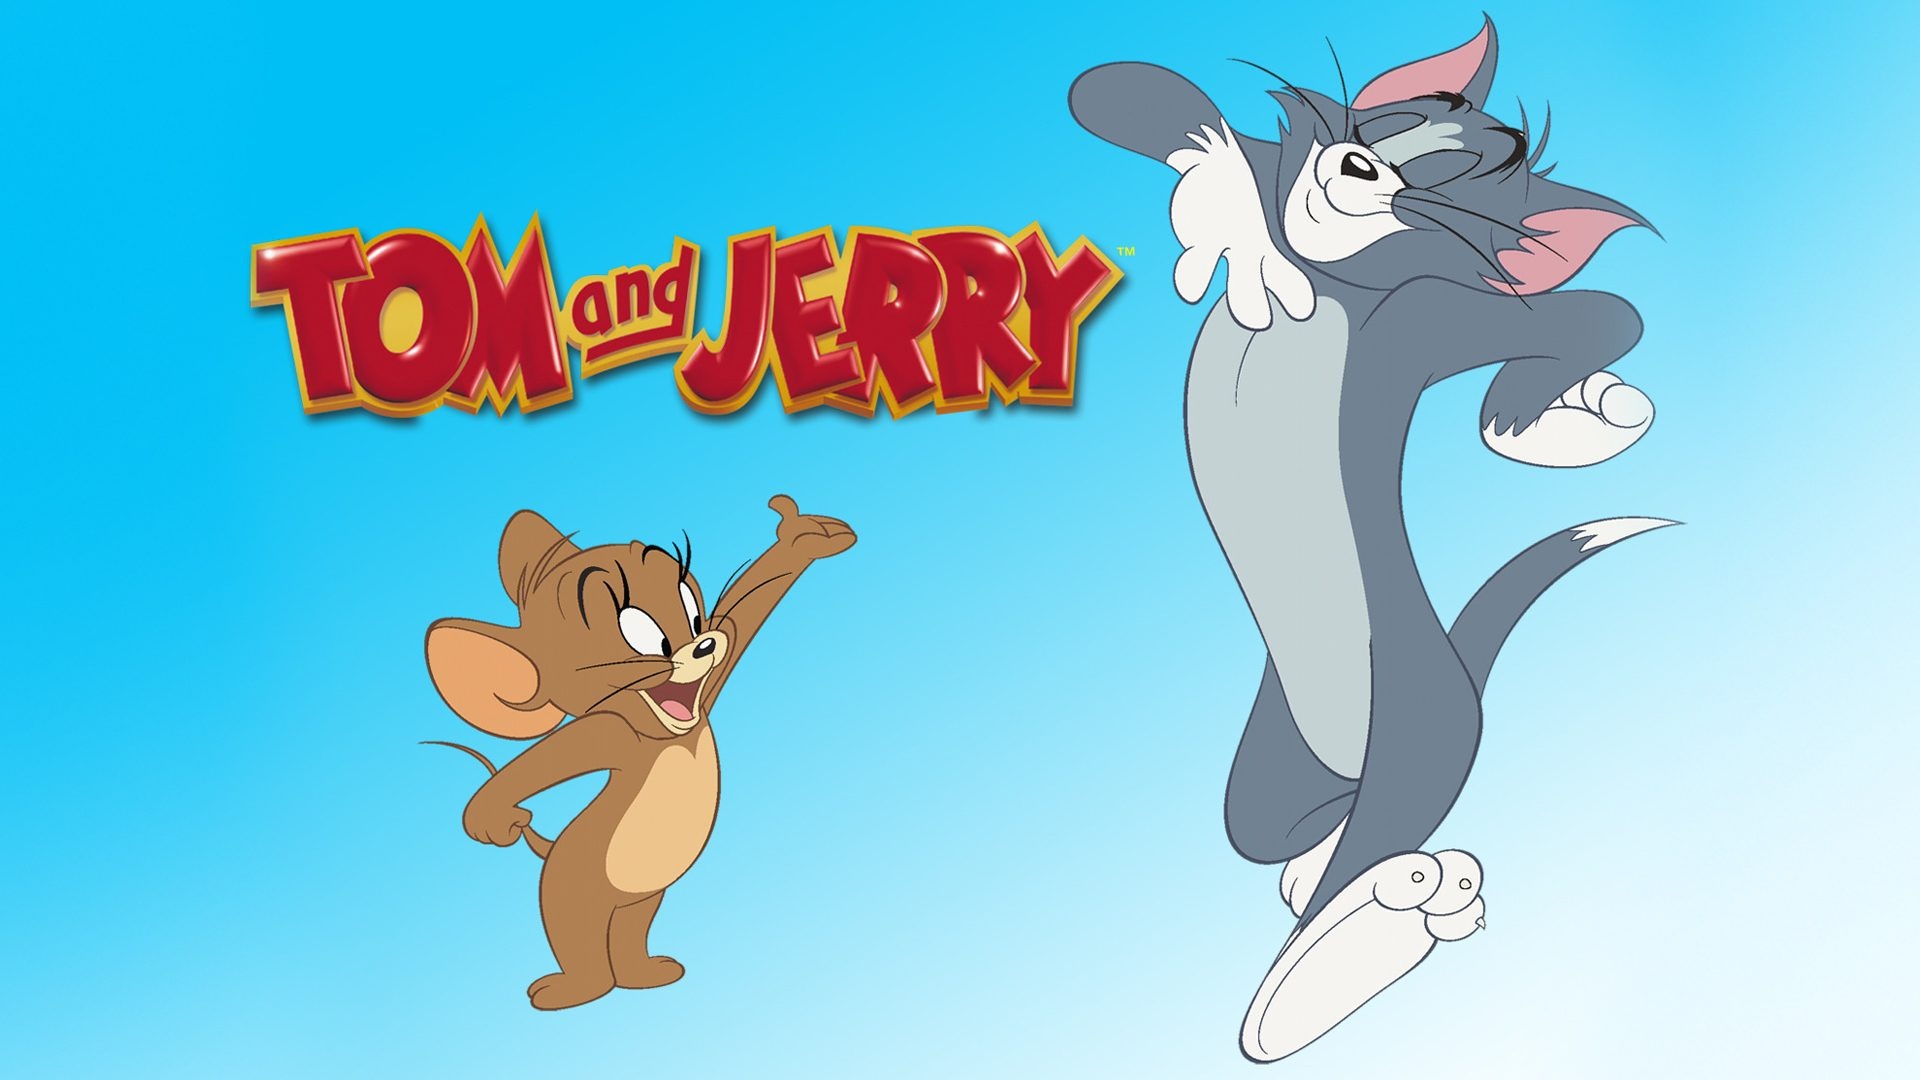 Tom and Jerry Animation, Tom and jerry TV, 1920x1080 Full HD Desktop